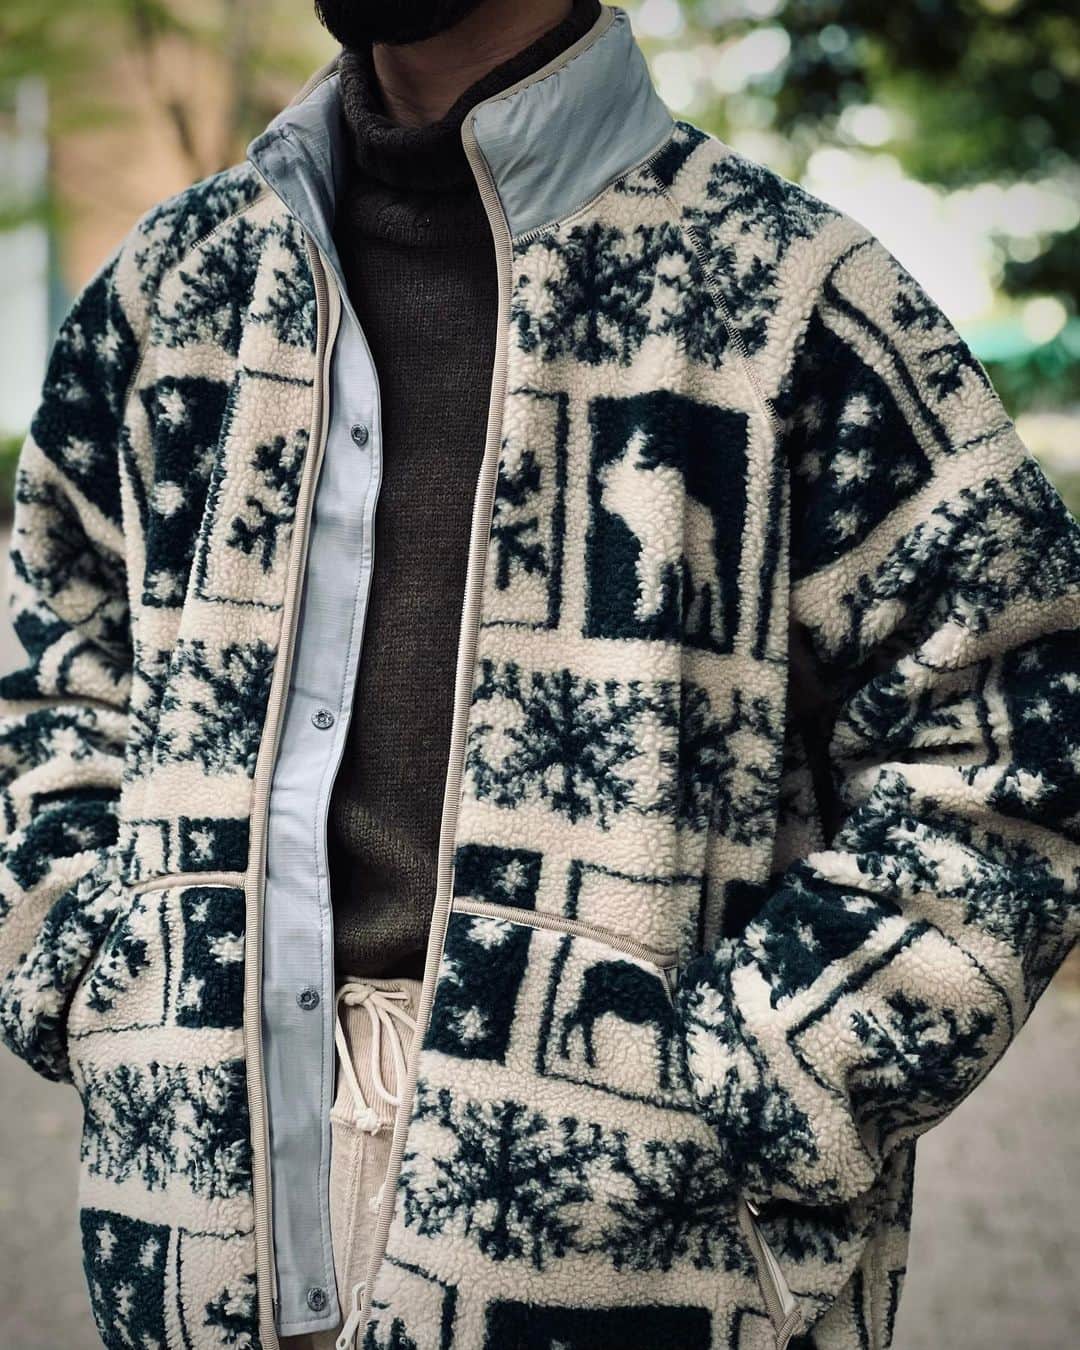 BEAMS+のインスタグラム：「・   BEAMS PLUS RECOMMEND  〈BEAMS PLUS〉  Boa Reversible Military Liner  The use of BEAMS PLUS original fabric, jacquard boa, gives this item a warmth that cannot be expressed by prints. You can feel the "winter" of the rich nature of the northern United States.  -------------------------------------  BEAMS PLUSのオリジナルファブリックであるジャカードボアを使用する事でプリントでは表現しきれない暖かみを感じる表情に。アメリカ北部の自然豊かな地域の「冬」を感じる事が出来ます。   #beams #beamsplus #beamsplusharajuku   #mensfashion」